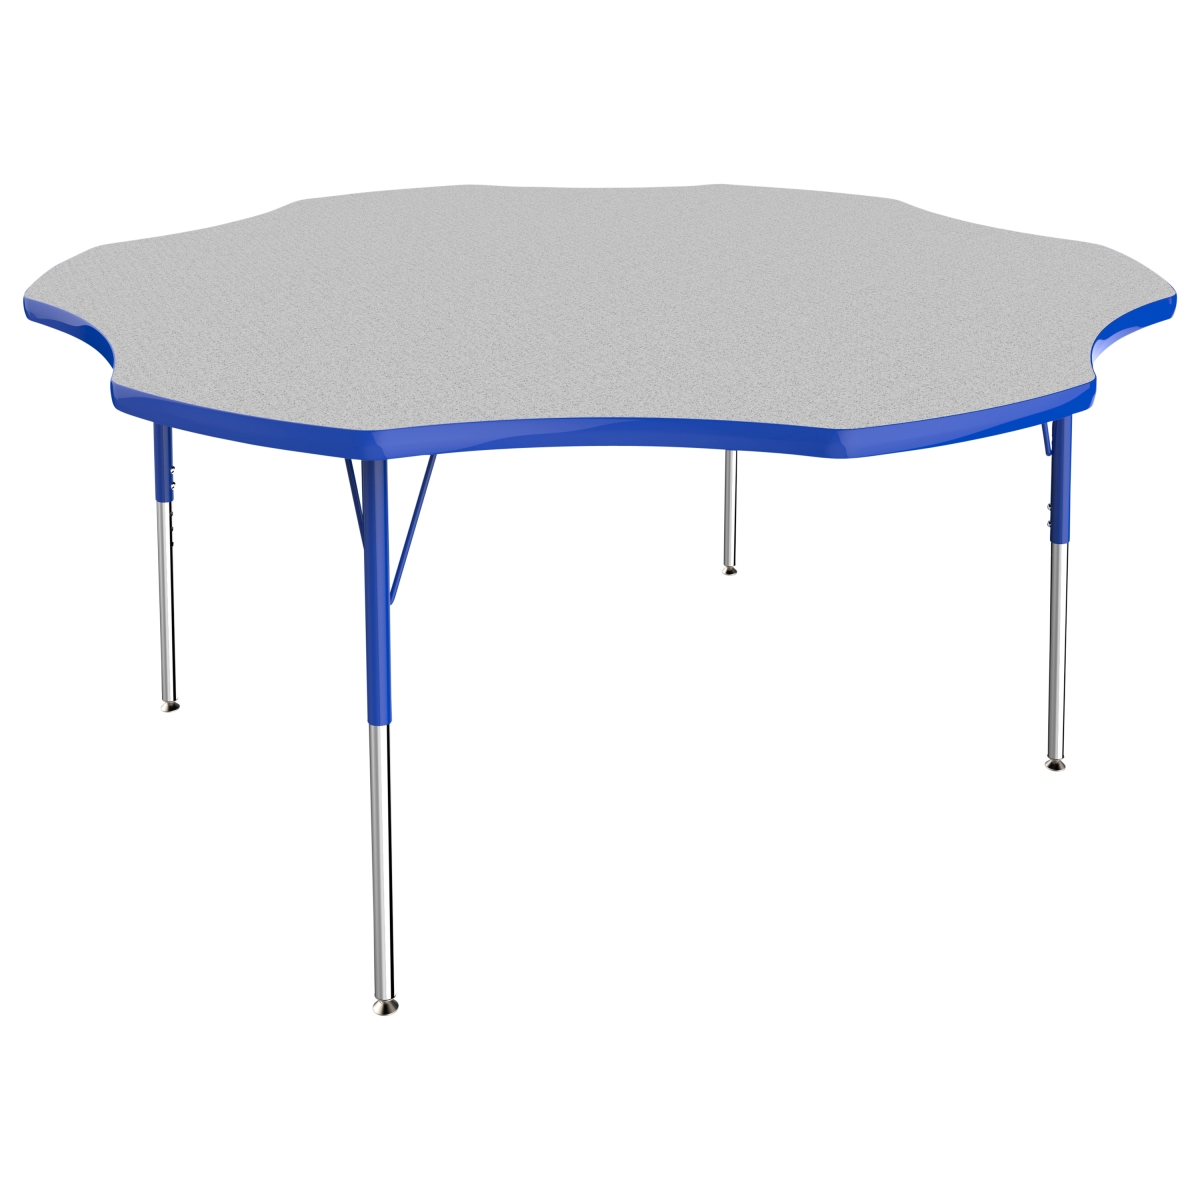 10089-gybl 60 In. Flower T-mold Adjustable Activity Table With Standard Swivel - Grey & Blue